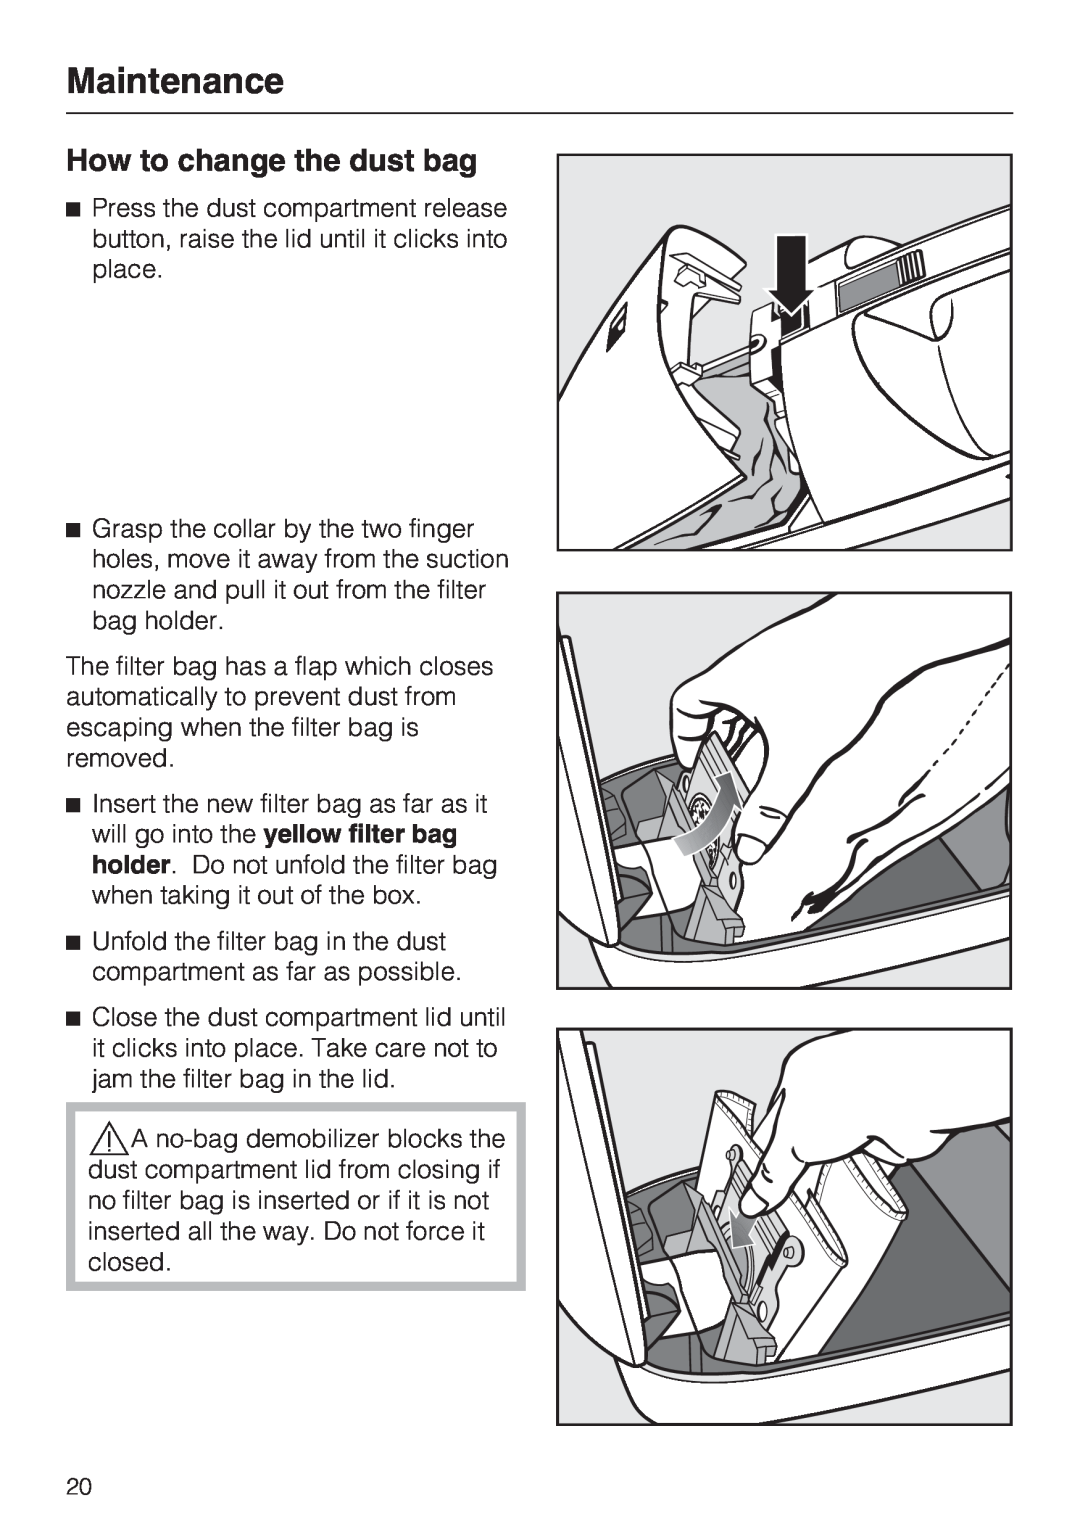 Miele S 190 manual How to change the dust bag, Maintenance 